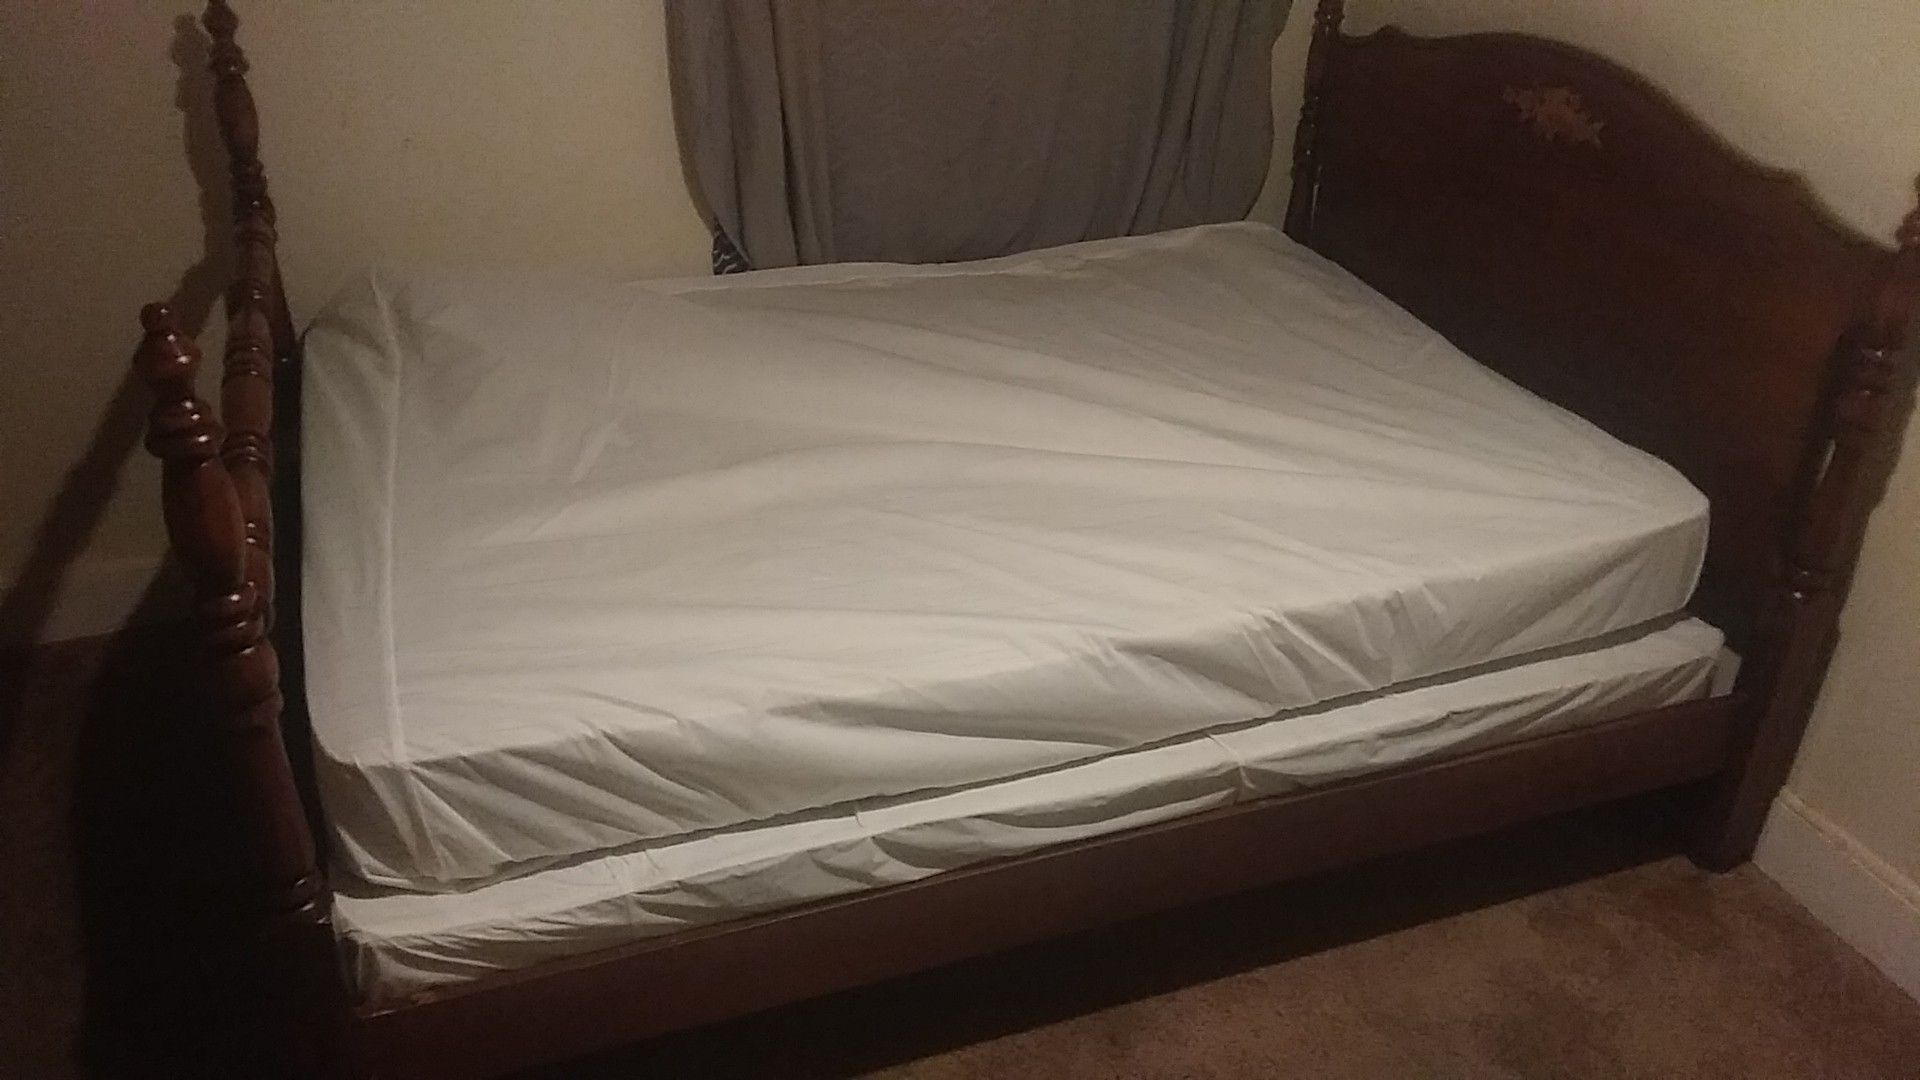 Full size four post bed. Clean and in good condition.